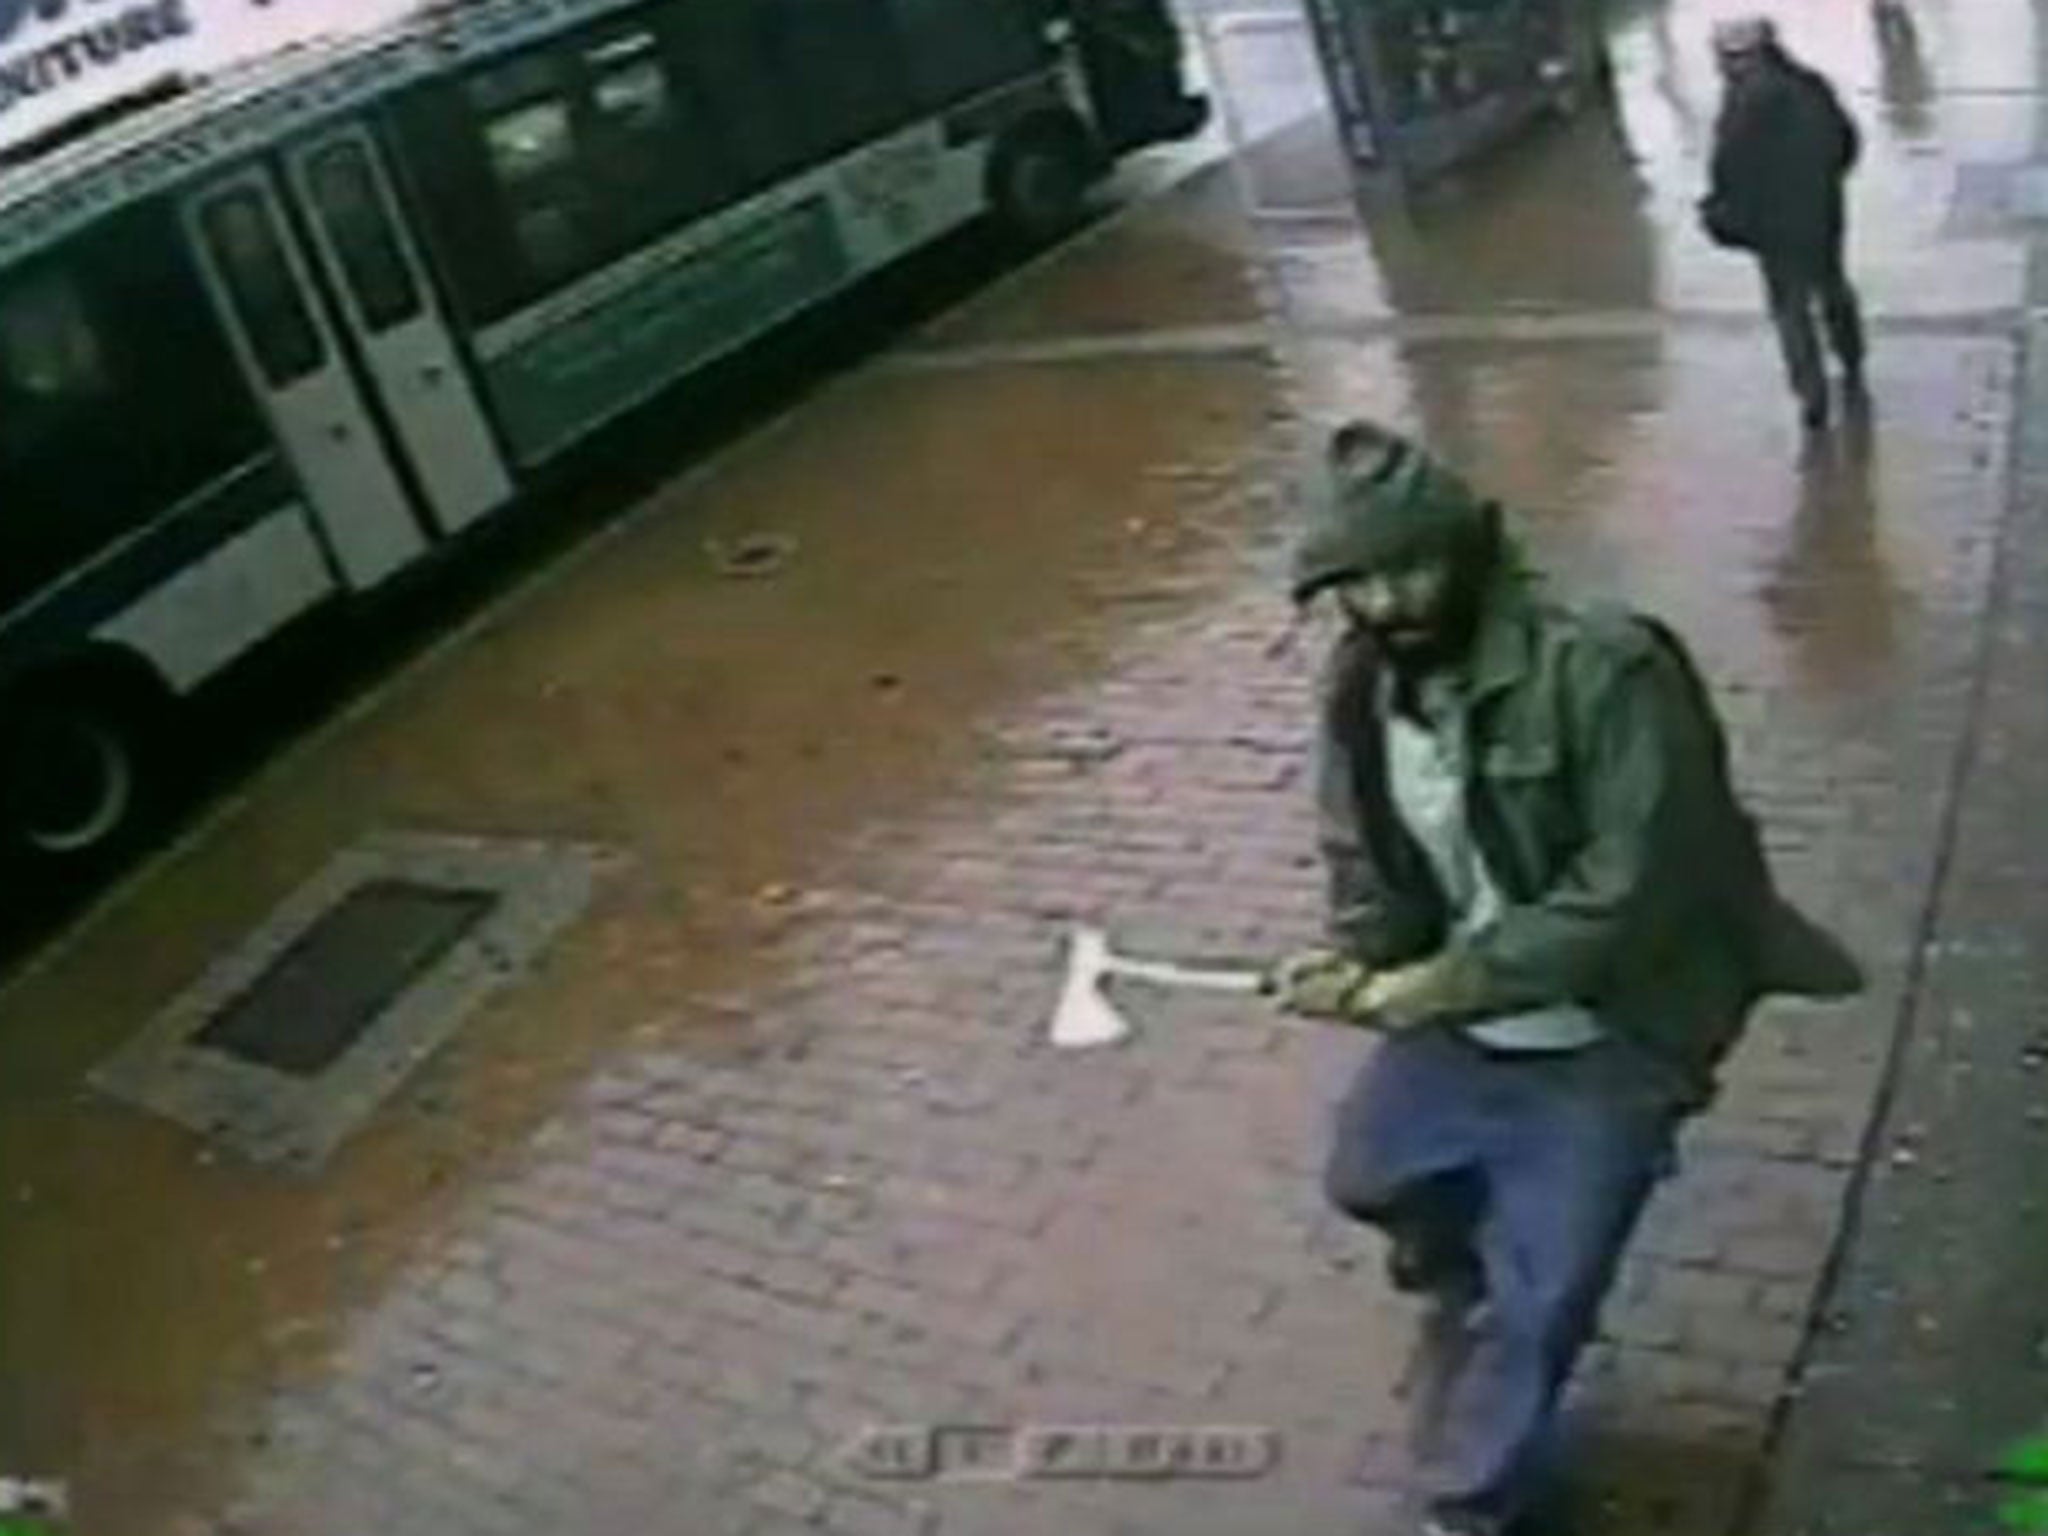 An unidentified man approaches New York City police officers with a hatchet